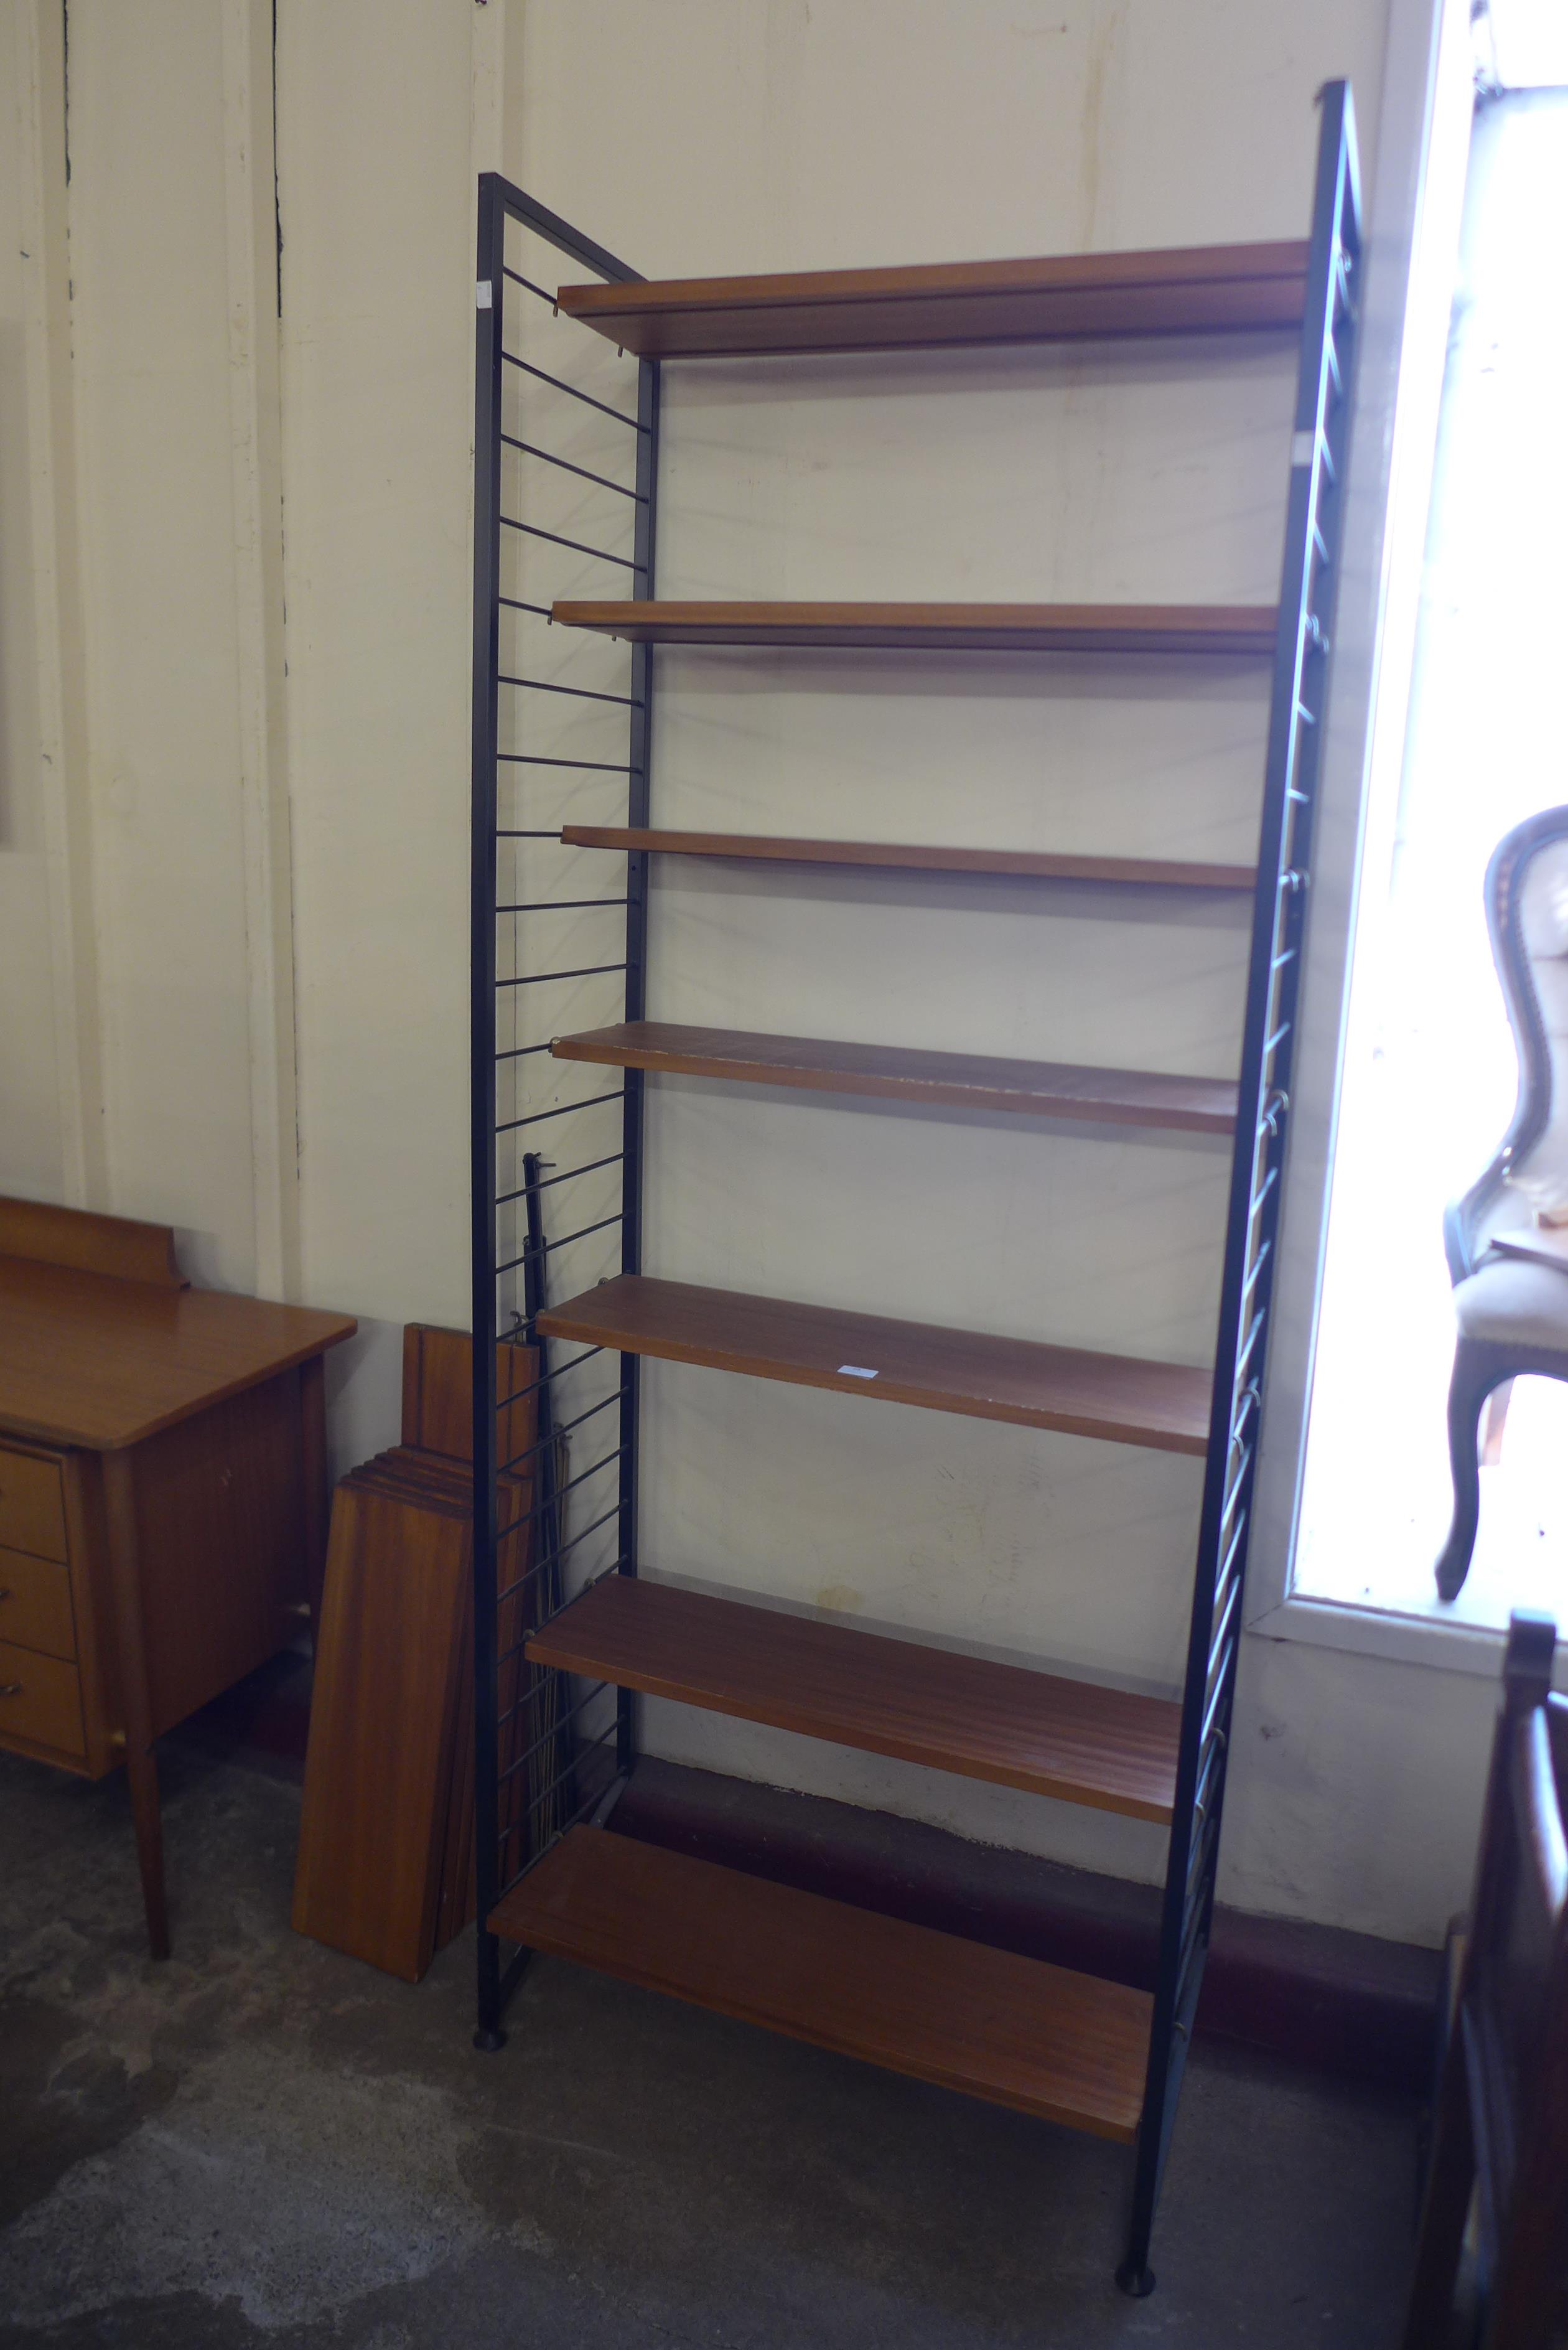 A teak and black metal Ladderax room divider with extra shelving